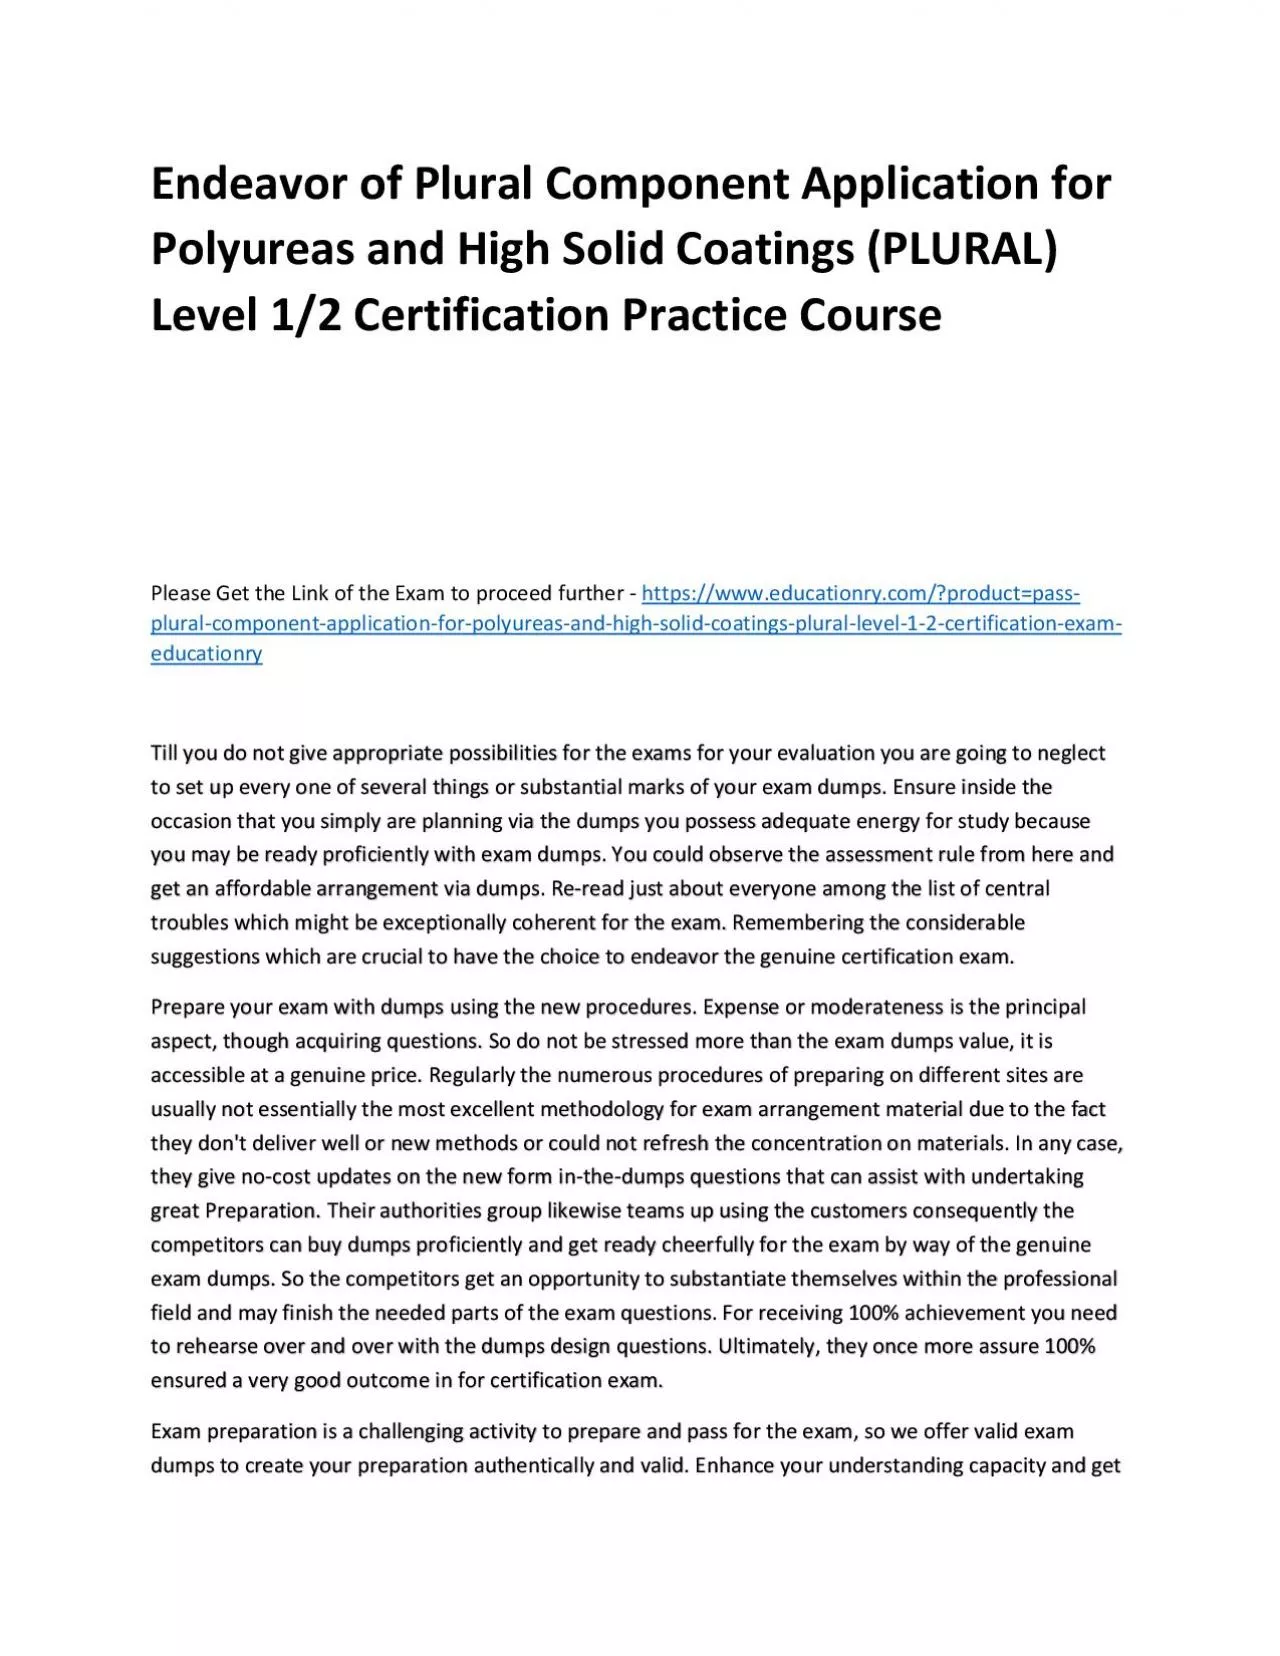 Plural Component Application for Polyureas and High Solid Coatings (PLURAL) Level 1/2